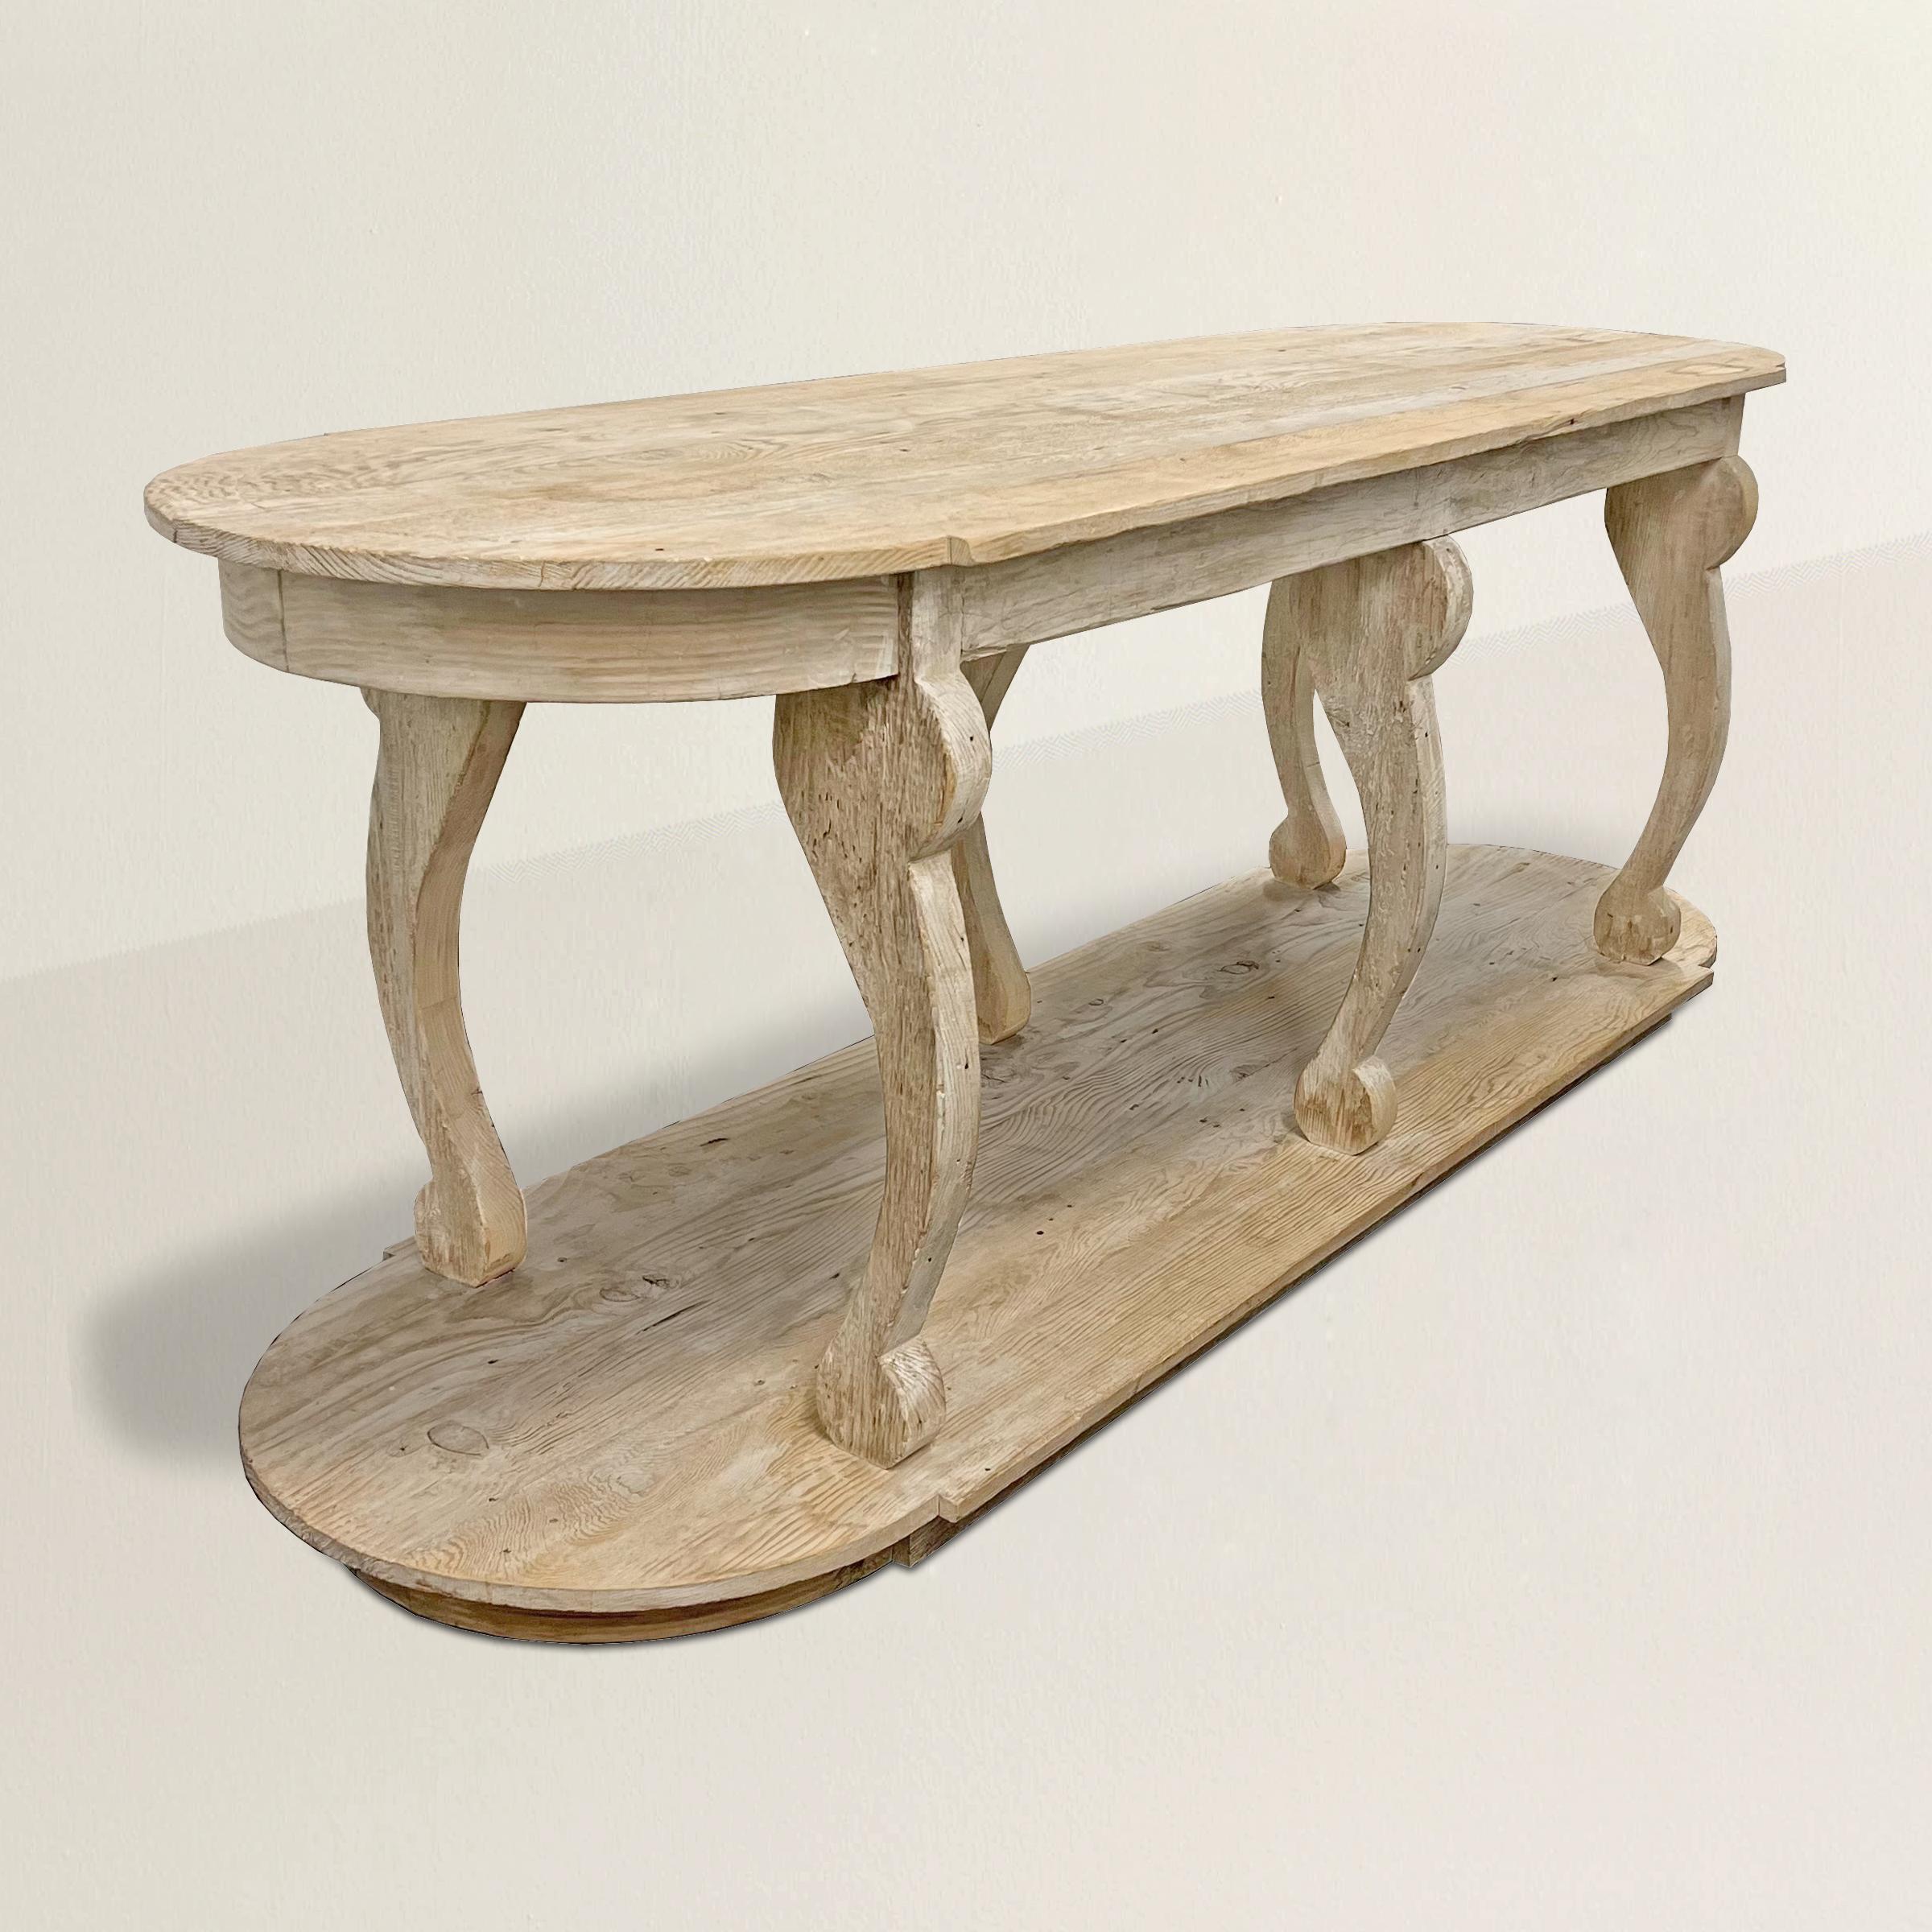 Introducing a delightful 20th-century Italian pine console table with a dash of whimsy and an abundance of personality. This quirky piece is sure to captivate with its unique design and charming features. The table boasts six distinctly curved legs,